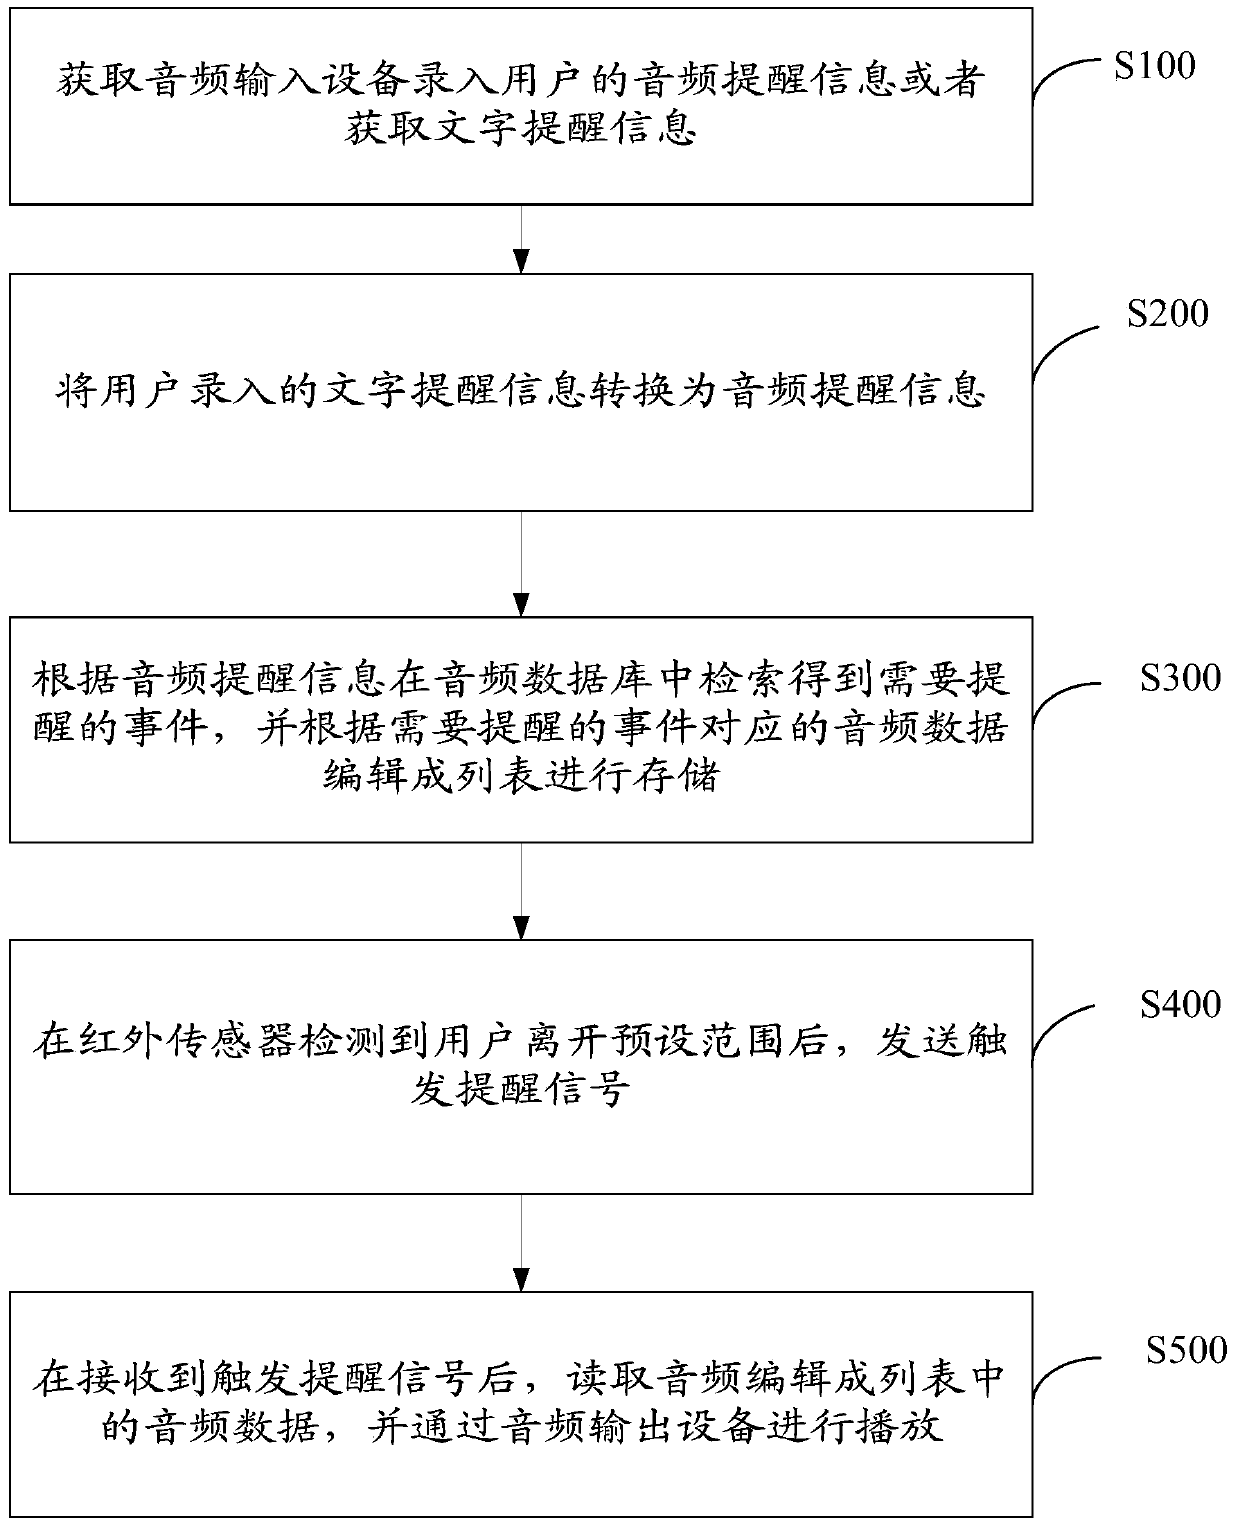 Voice memo prompting method and device